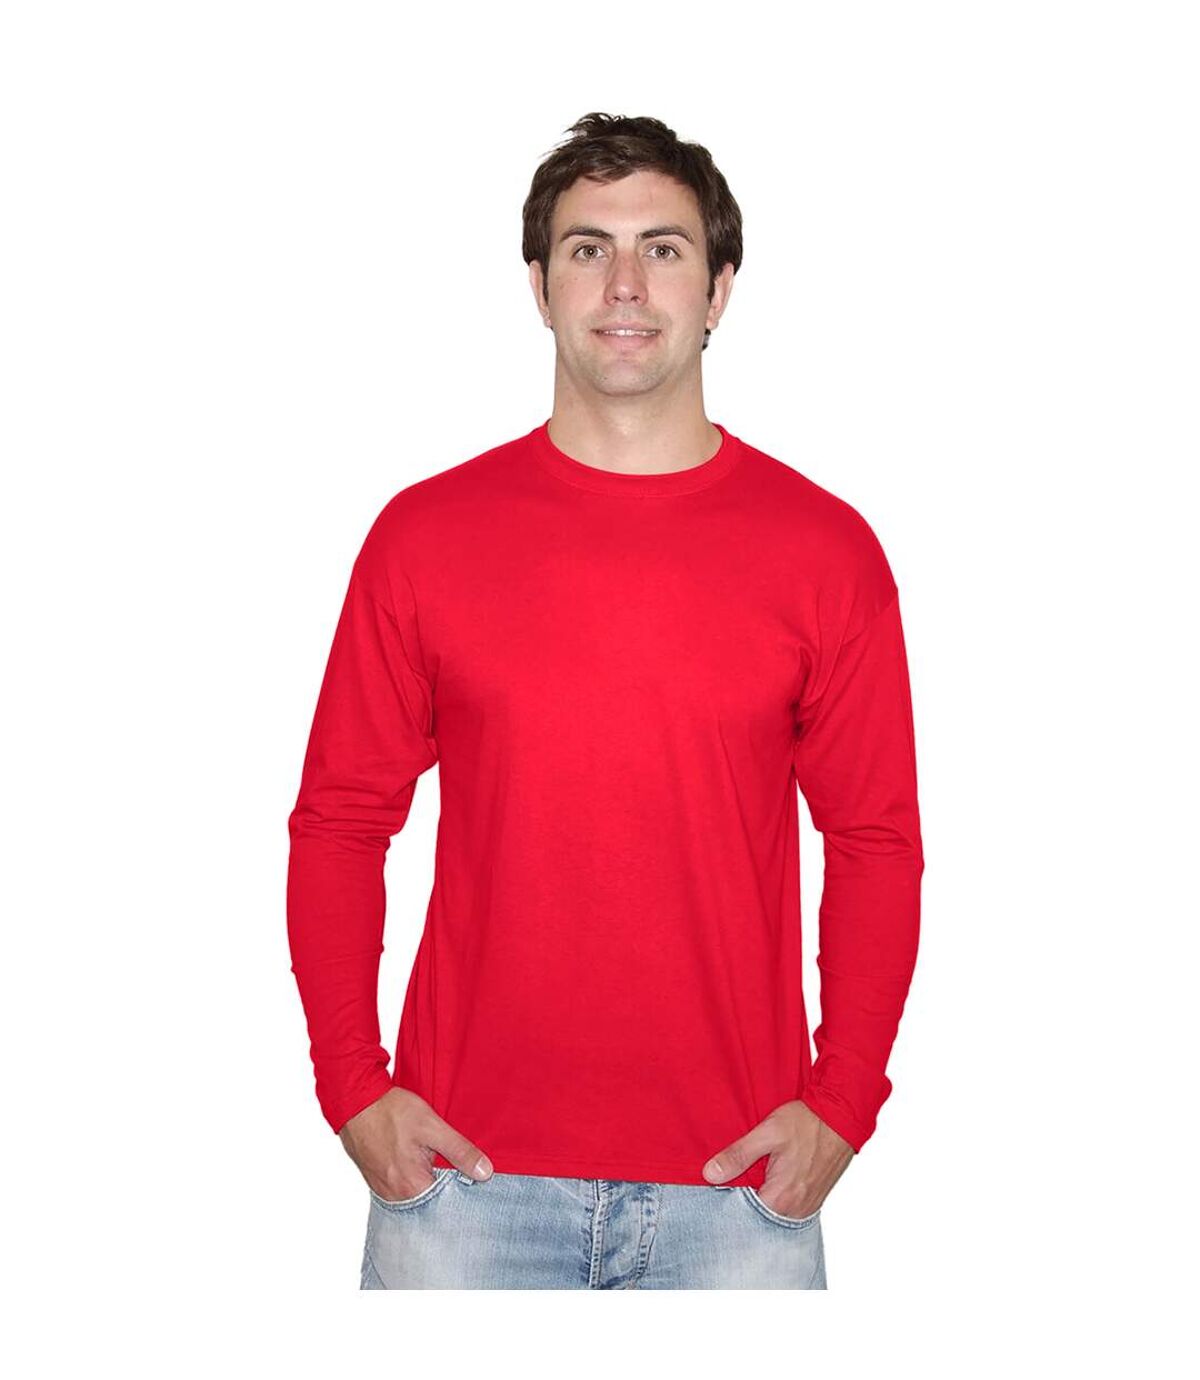 Fruit of the Loom Mens R Long-Sleeved T-Shirt (Red)